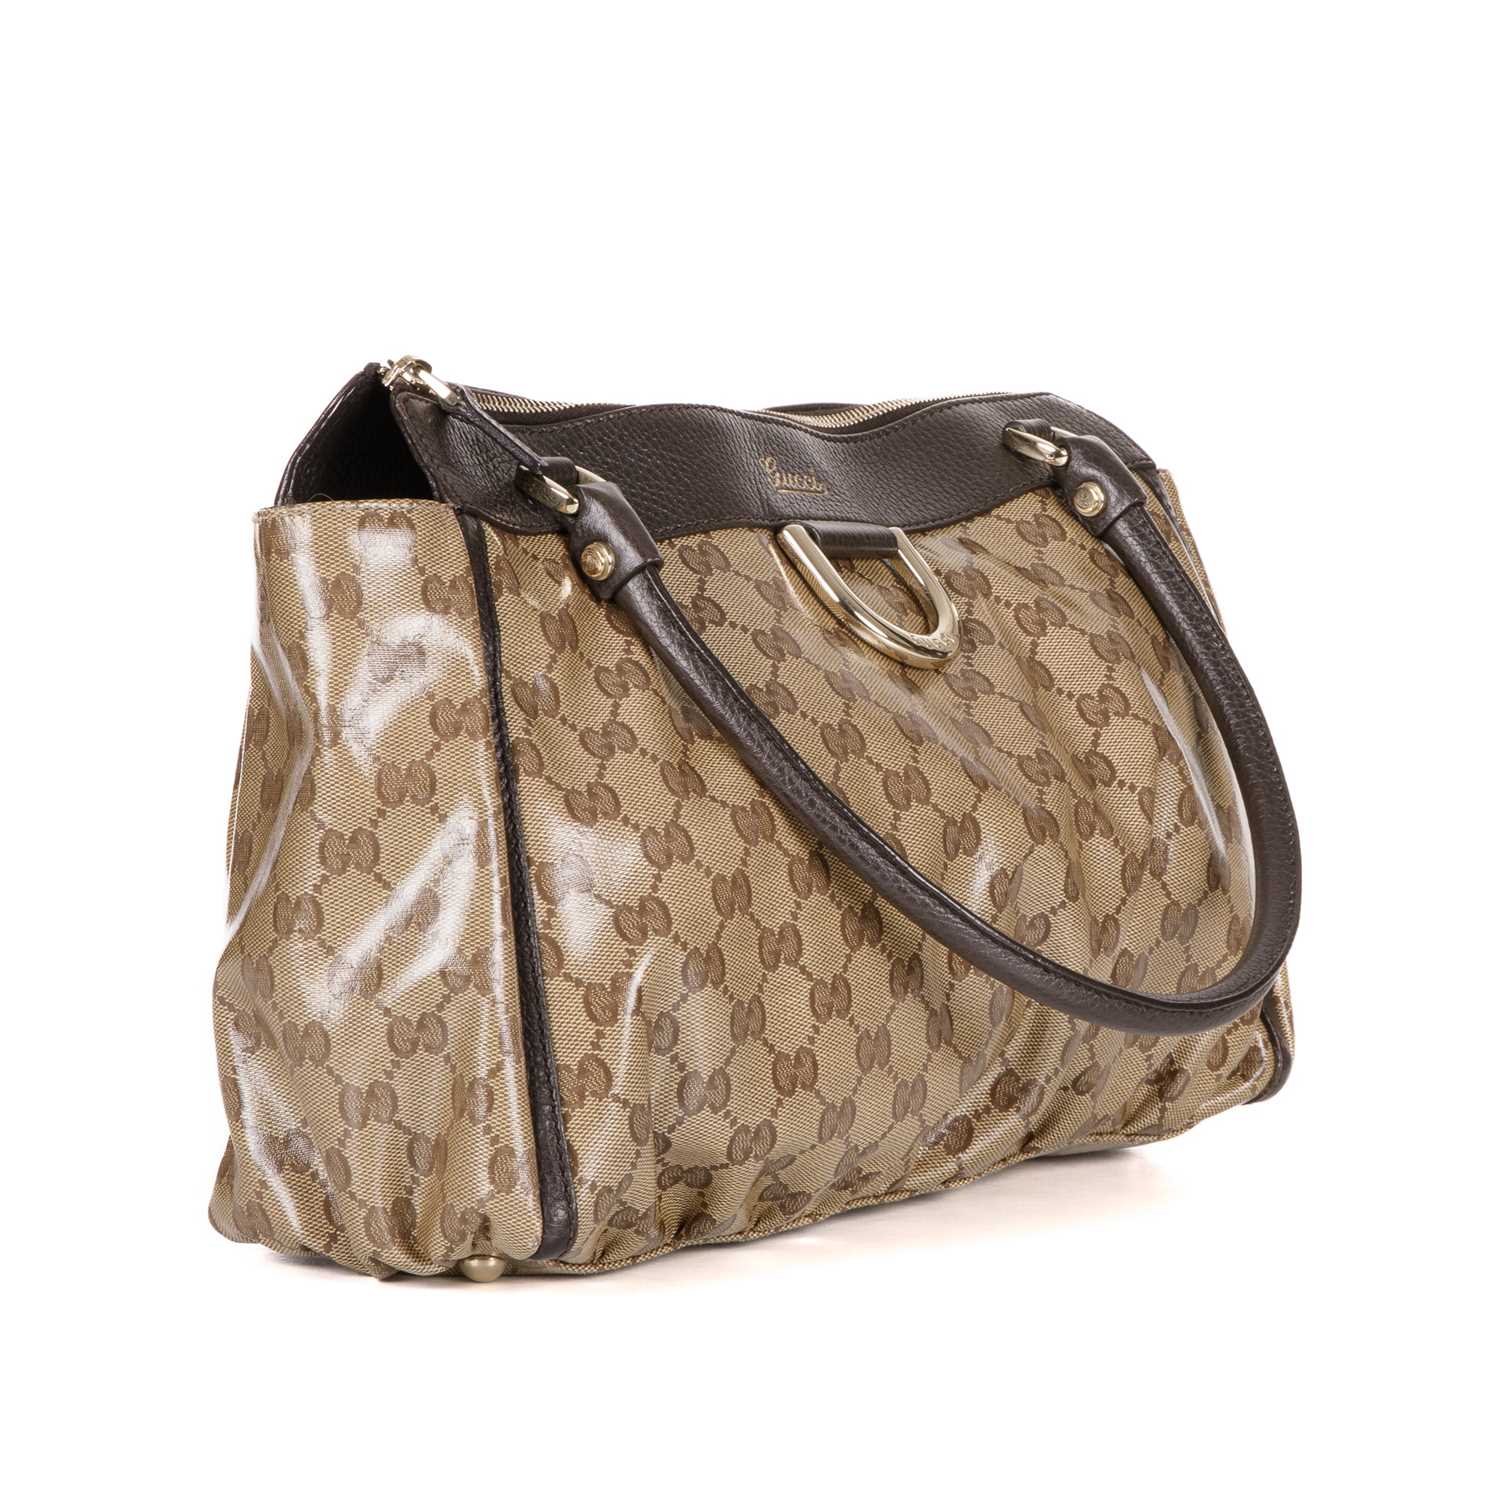 Gucci, a GG Crystal Abbey tote, designed with maker's PVC coated monogram exterior and brown leather - Image 3 of 4